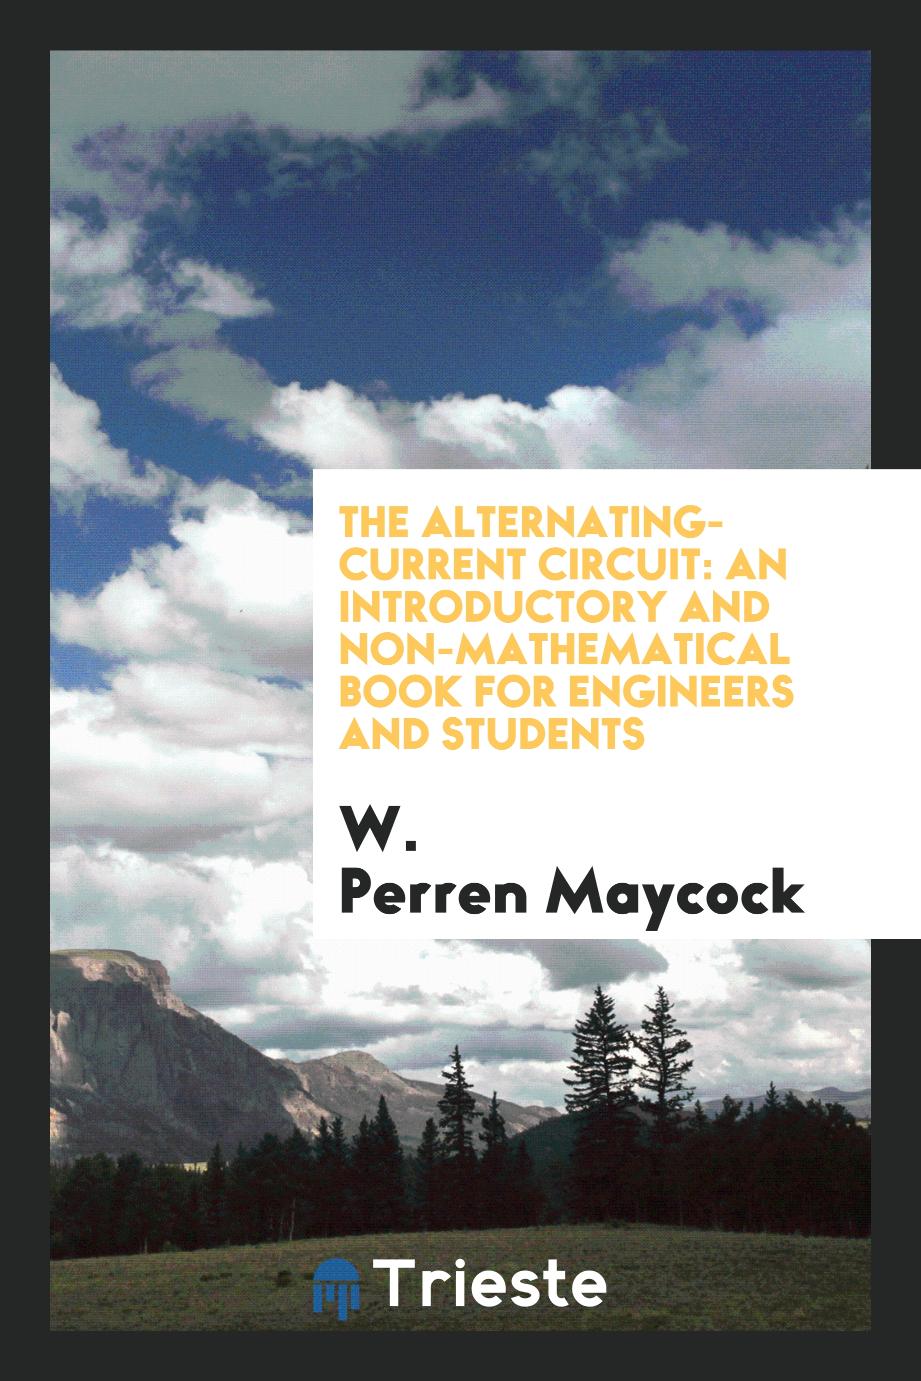 The Alternating-Current Circuit: An Introductory and Non-mathematical Book for Engineers and Students